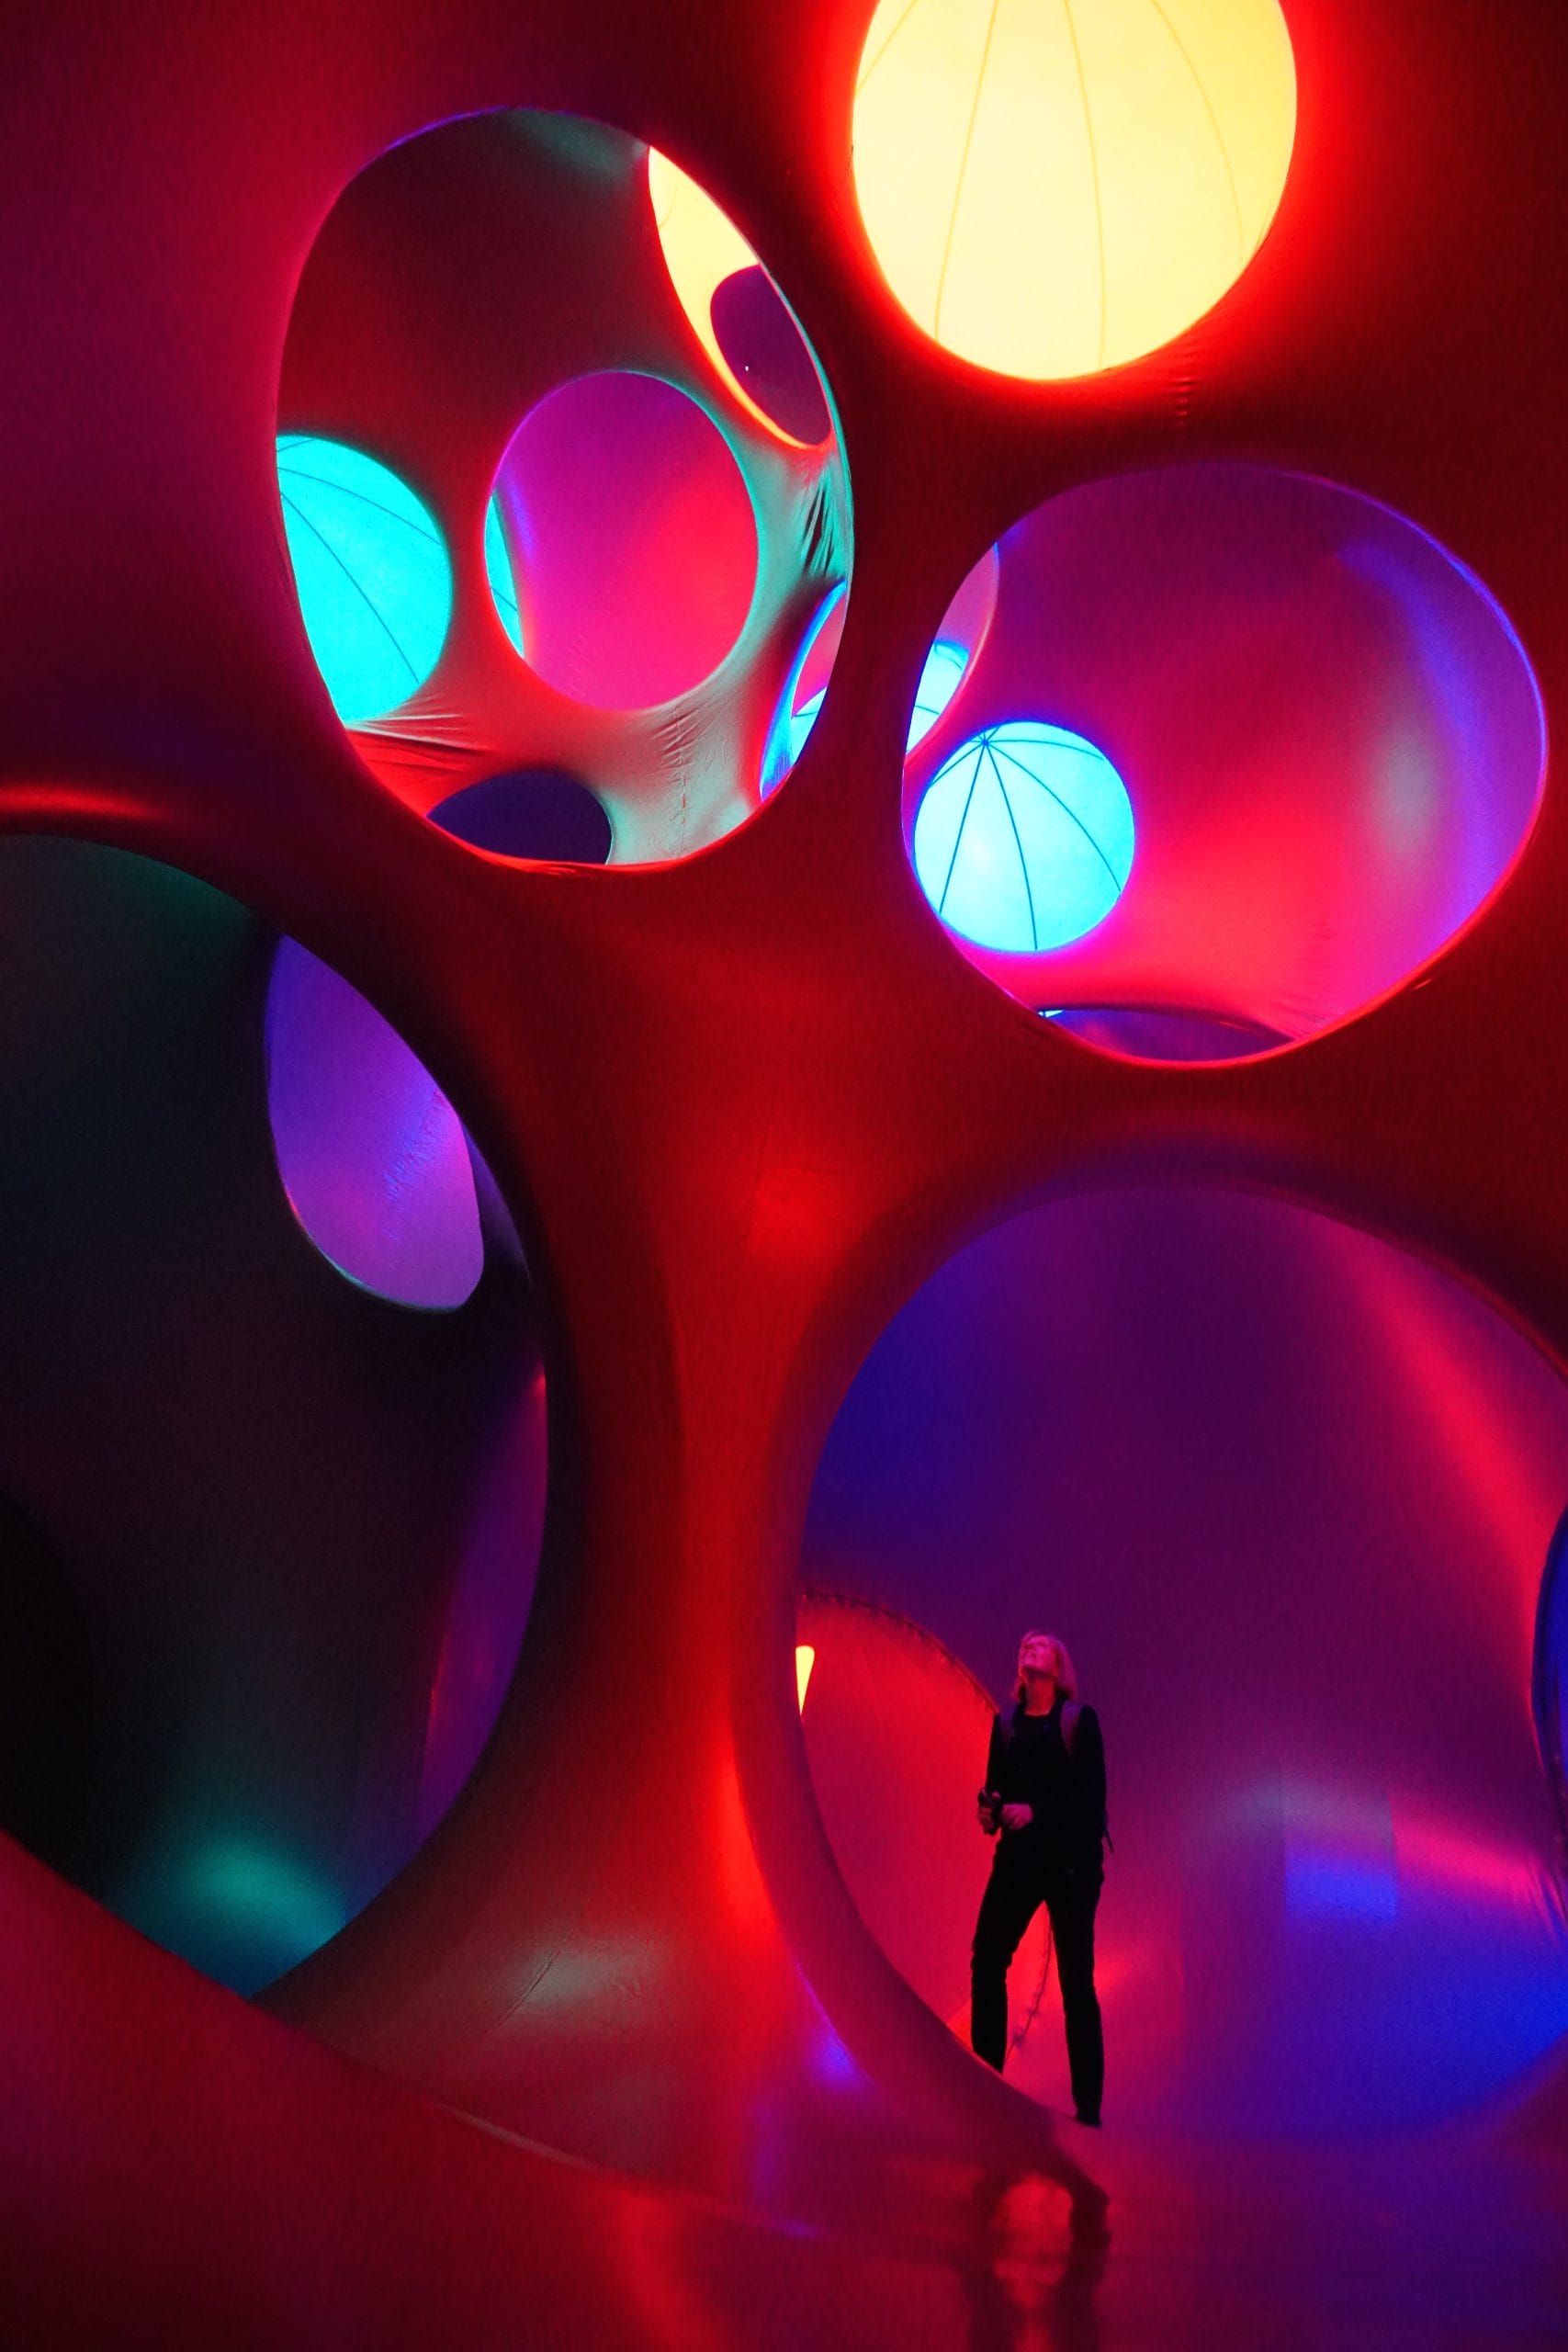 A woman looks up at a luminarium tree, which glows red, blue and yellow and is a series of circles that seems to hang in the roof of a large dome within the luminarium.